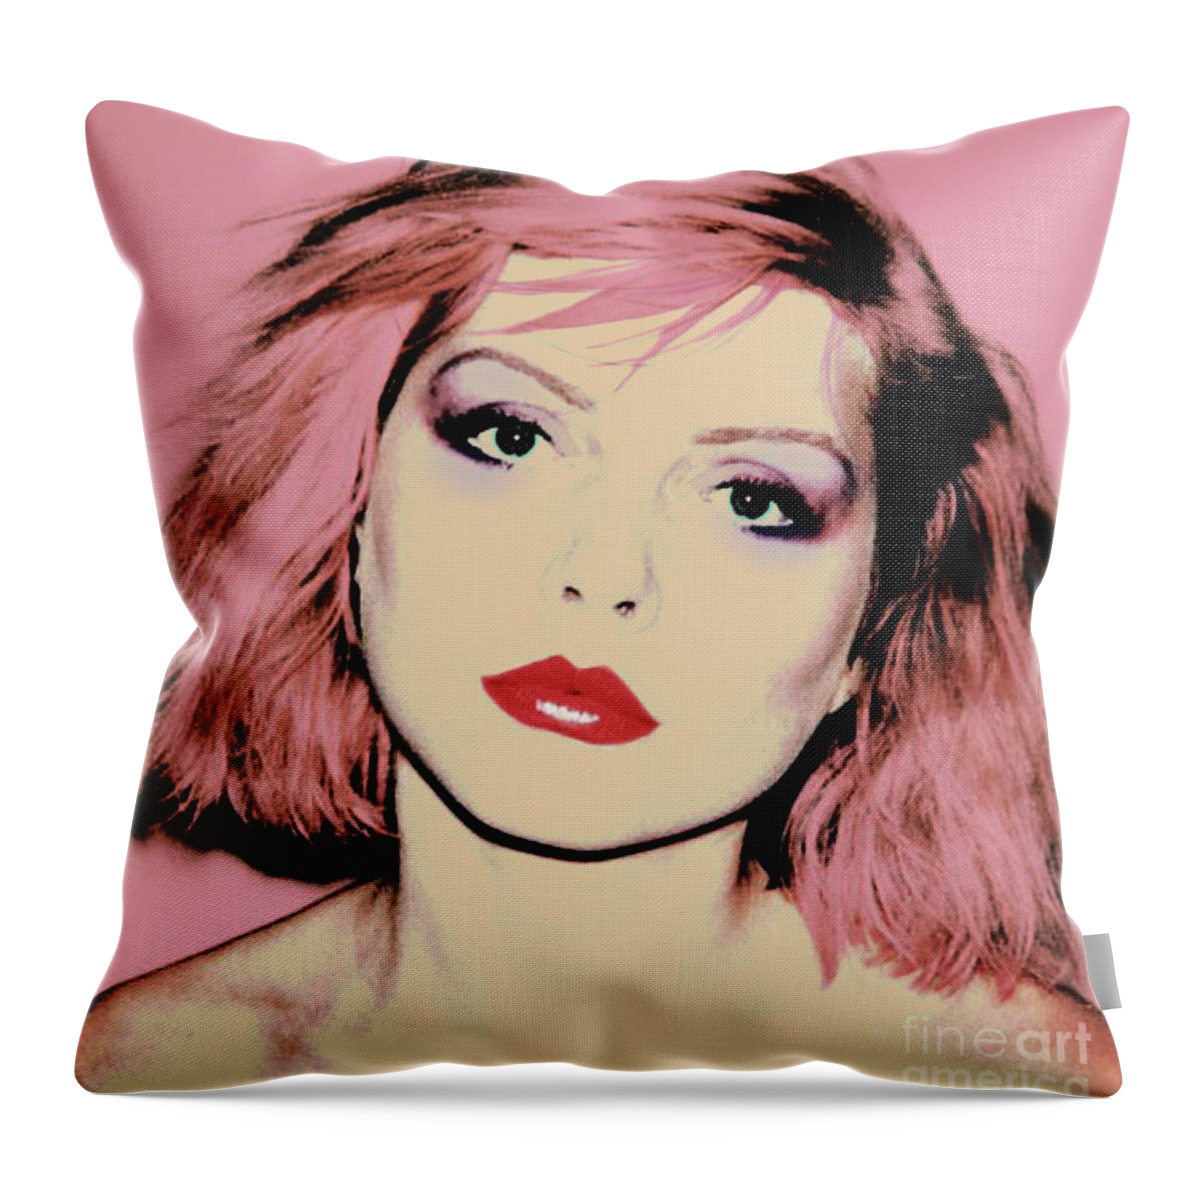 Blondie Pink Throw Pillow featuring the mixed media Blondie, Pink by Thomas Pollart